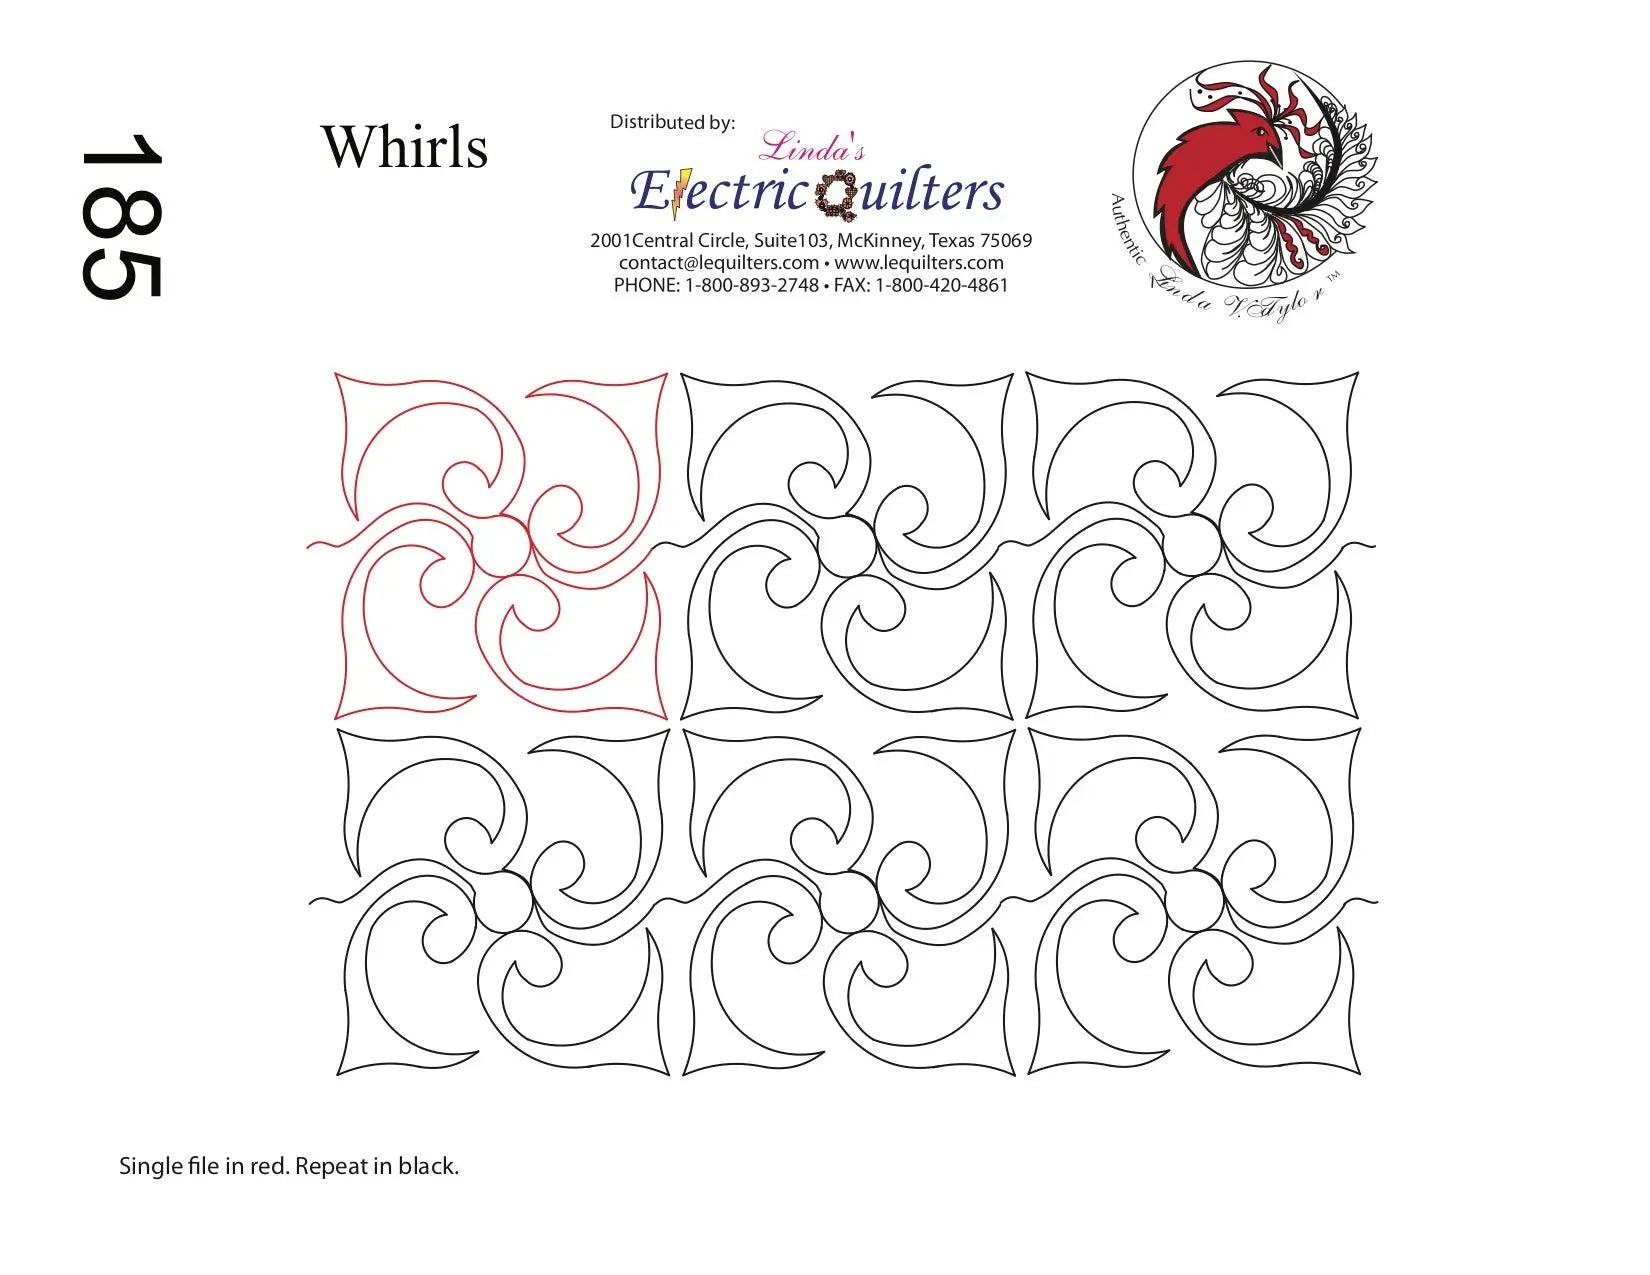 185 Whirls Pantograph by Linda V. Taylor - Linda's Electric Quilters